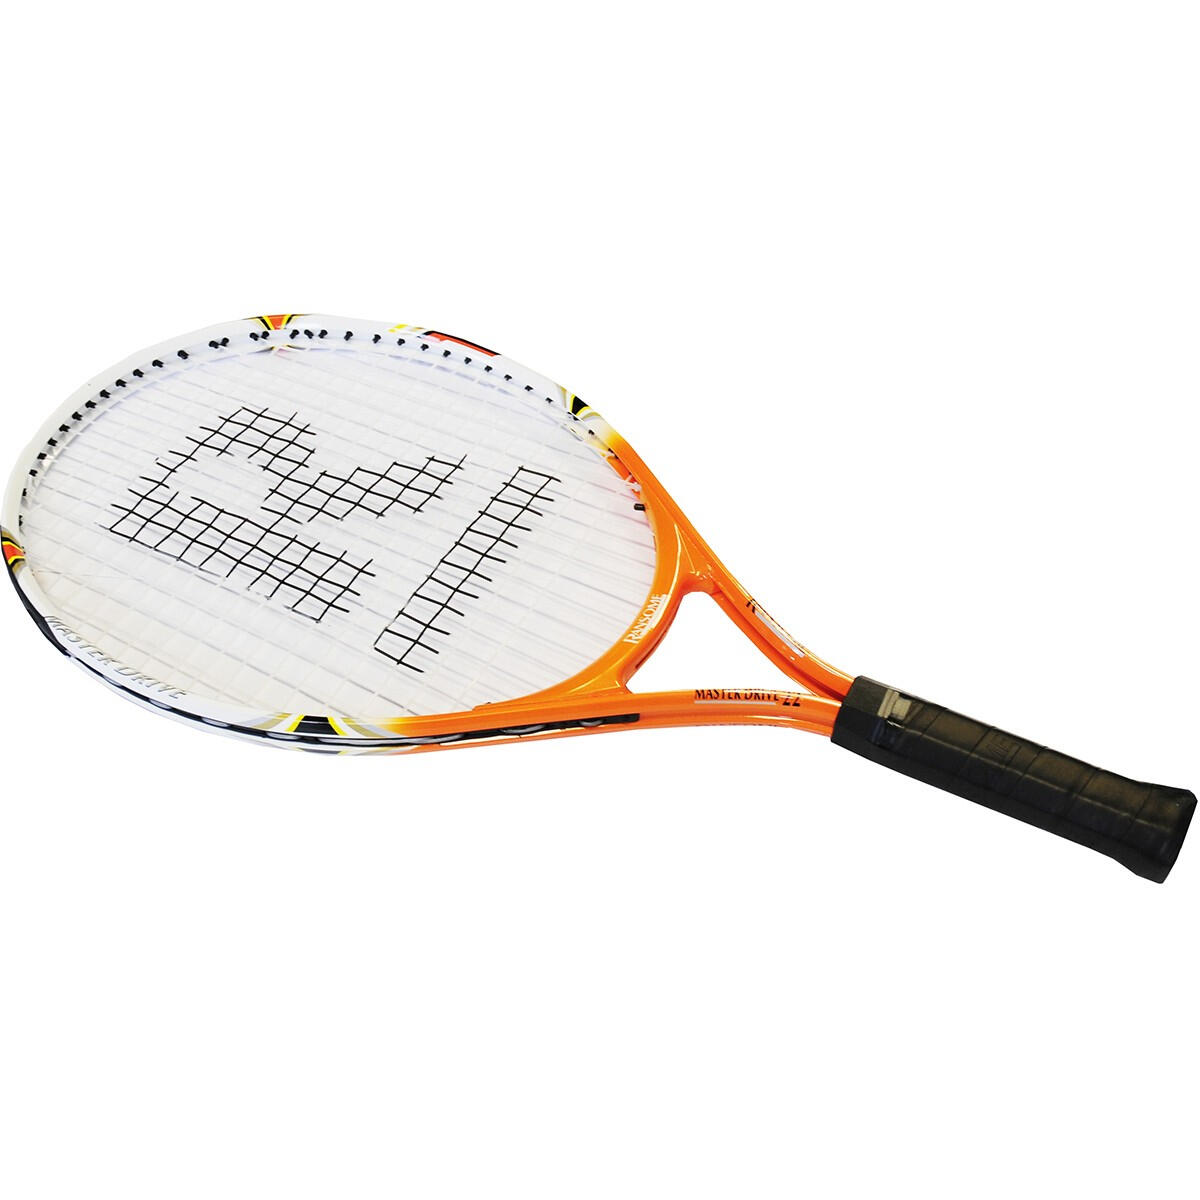 RANSOME PRIMARY BAG 15 TENNIS RACKETS 96 BALLS 3/5